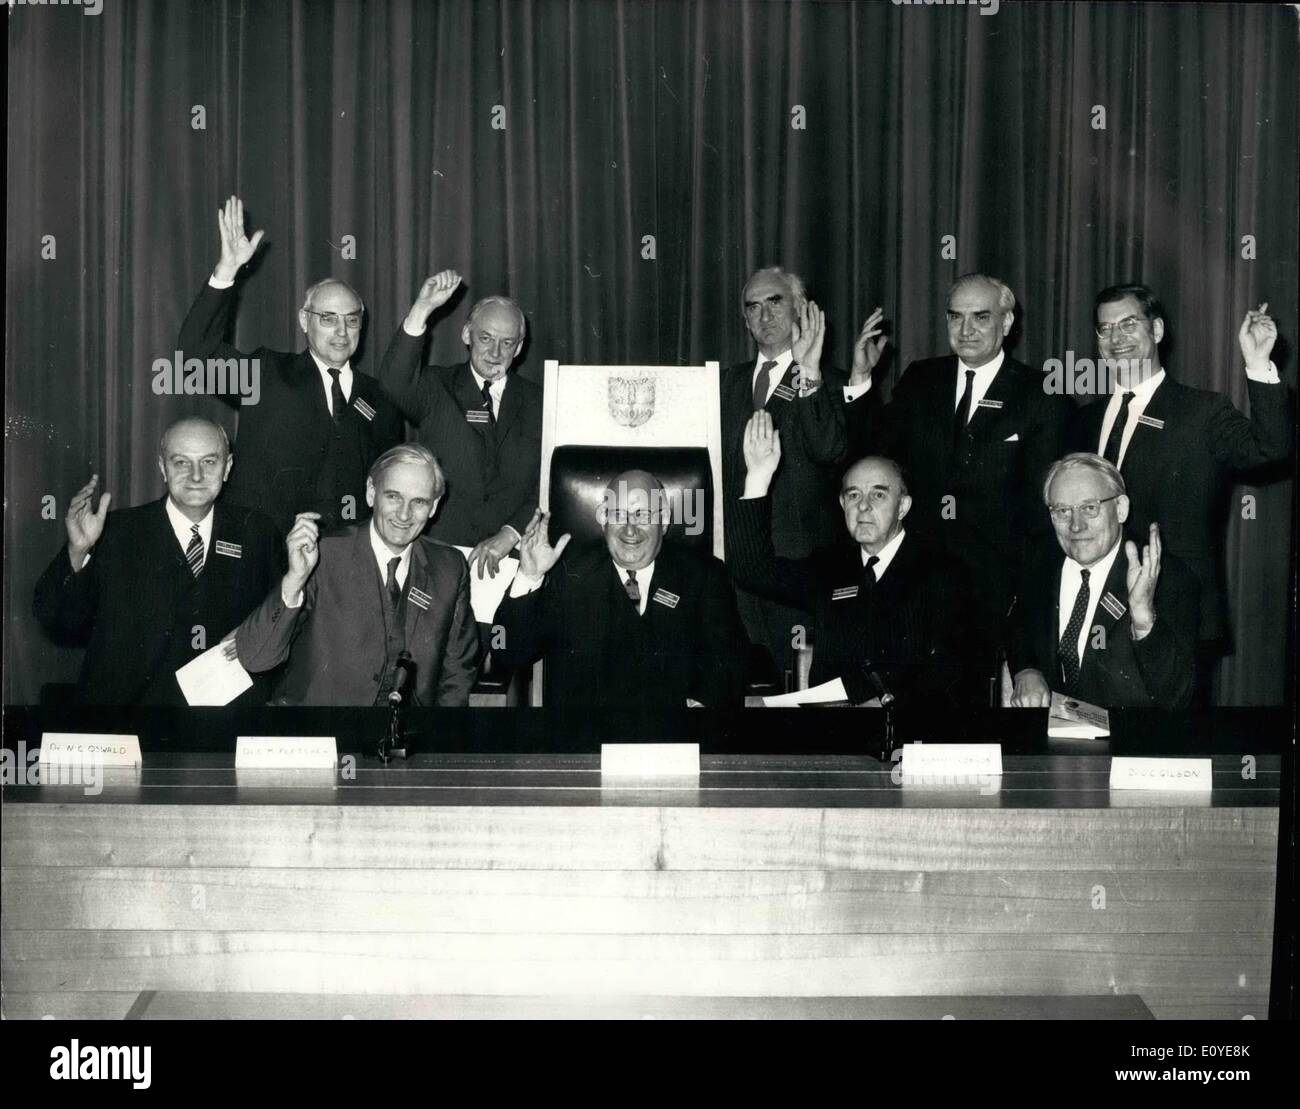 Jan. 01, 1970 - Smoking Report Press Conference At Royal College Of Physician. The y Set An Example: Lord Rosenheim, President of the Royal College of Physicians of London, today presented the College Retort ''Smoking and Health Now''. Photo Shows Members of the Report Committee, when asked at today's Press Conference which of them had given up smoking cigarette - they all raised their hands. (L to R - Back Row: Dr. J.G. Scadding; Sir Francis Avery Jones; Dr. P.J. Lawther; Dr. D.D. Reid; Dr. L.H. Capel (L to R - Front Row): Dr. N.C. Oswald; Dr. C.M Stock Photo